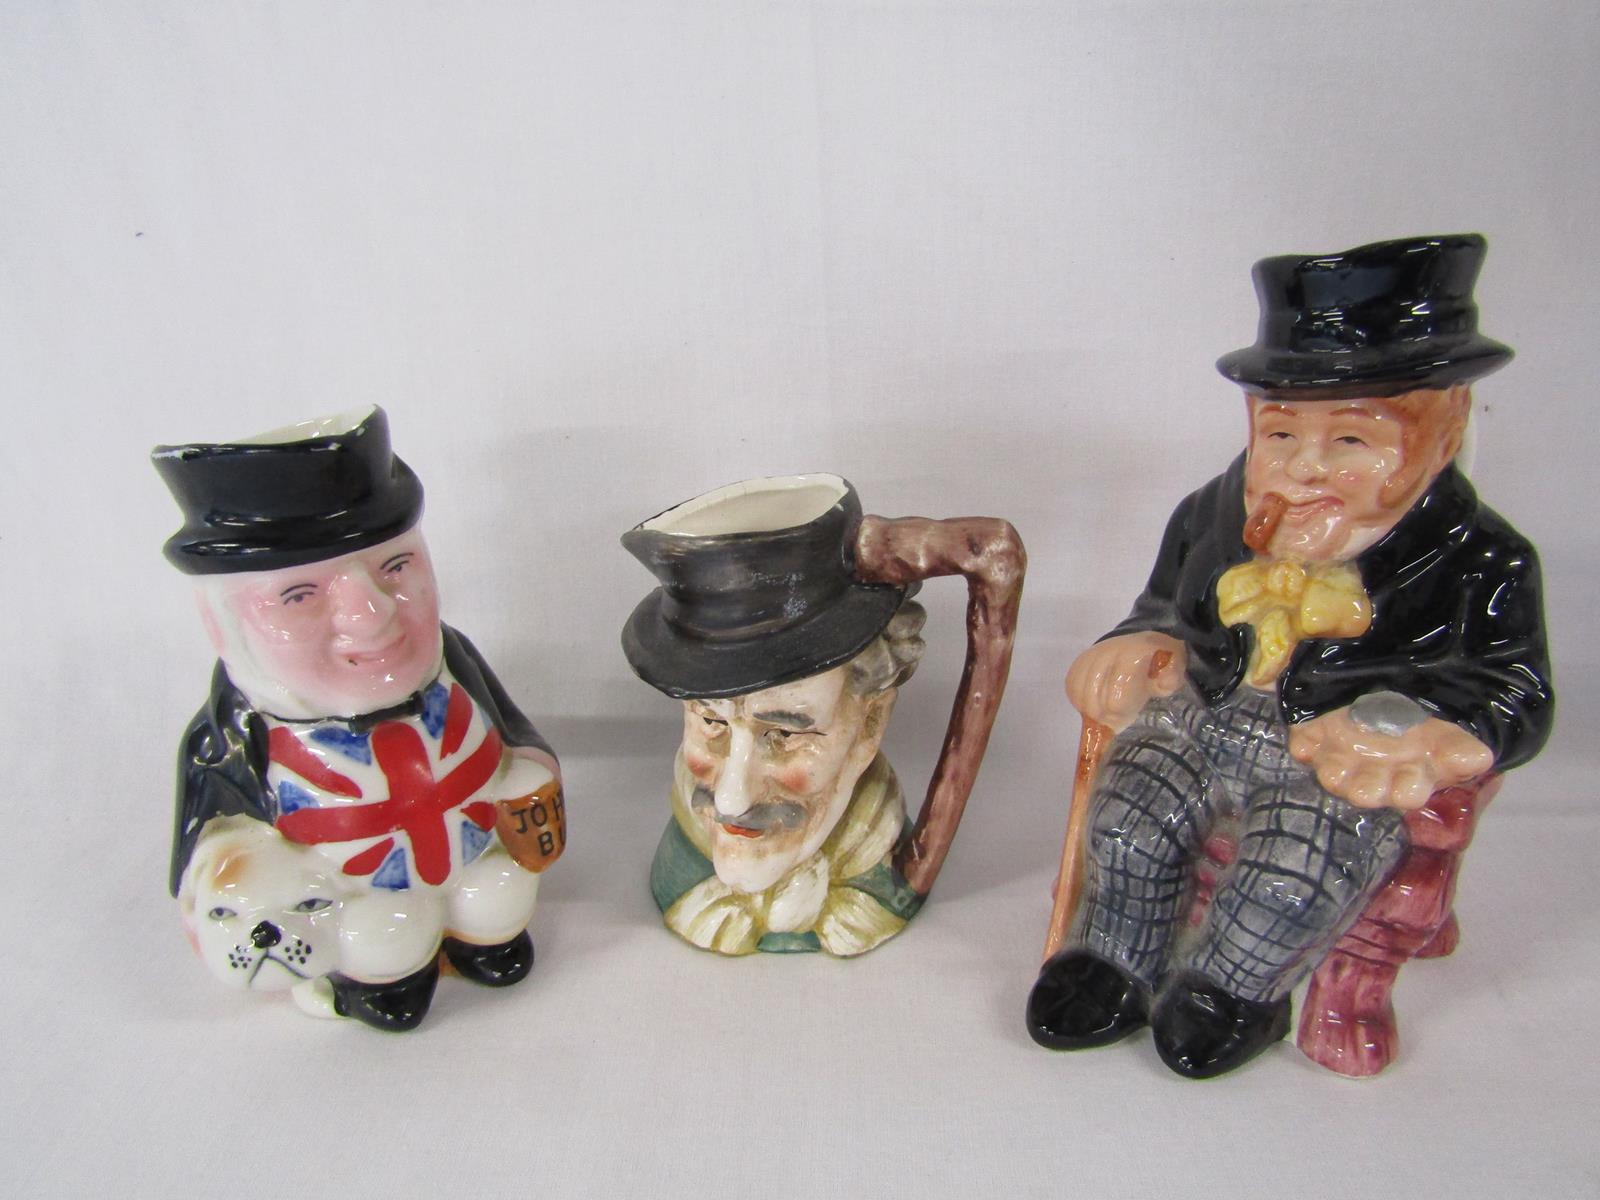 14 character & toby jugs includes town crier, Kelsbro Ware 'Mr Pickwick', Royal Doulton miniature, - Image 4 of 6